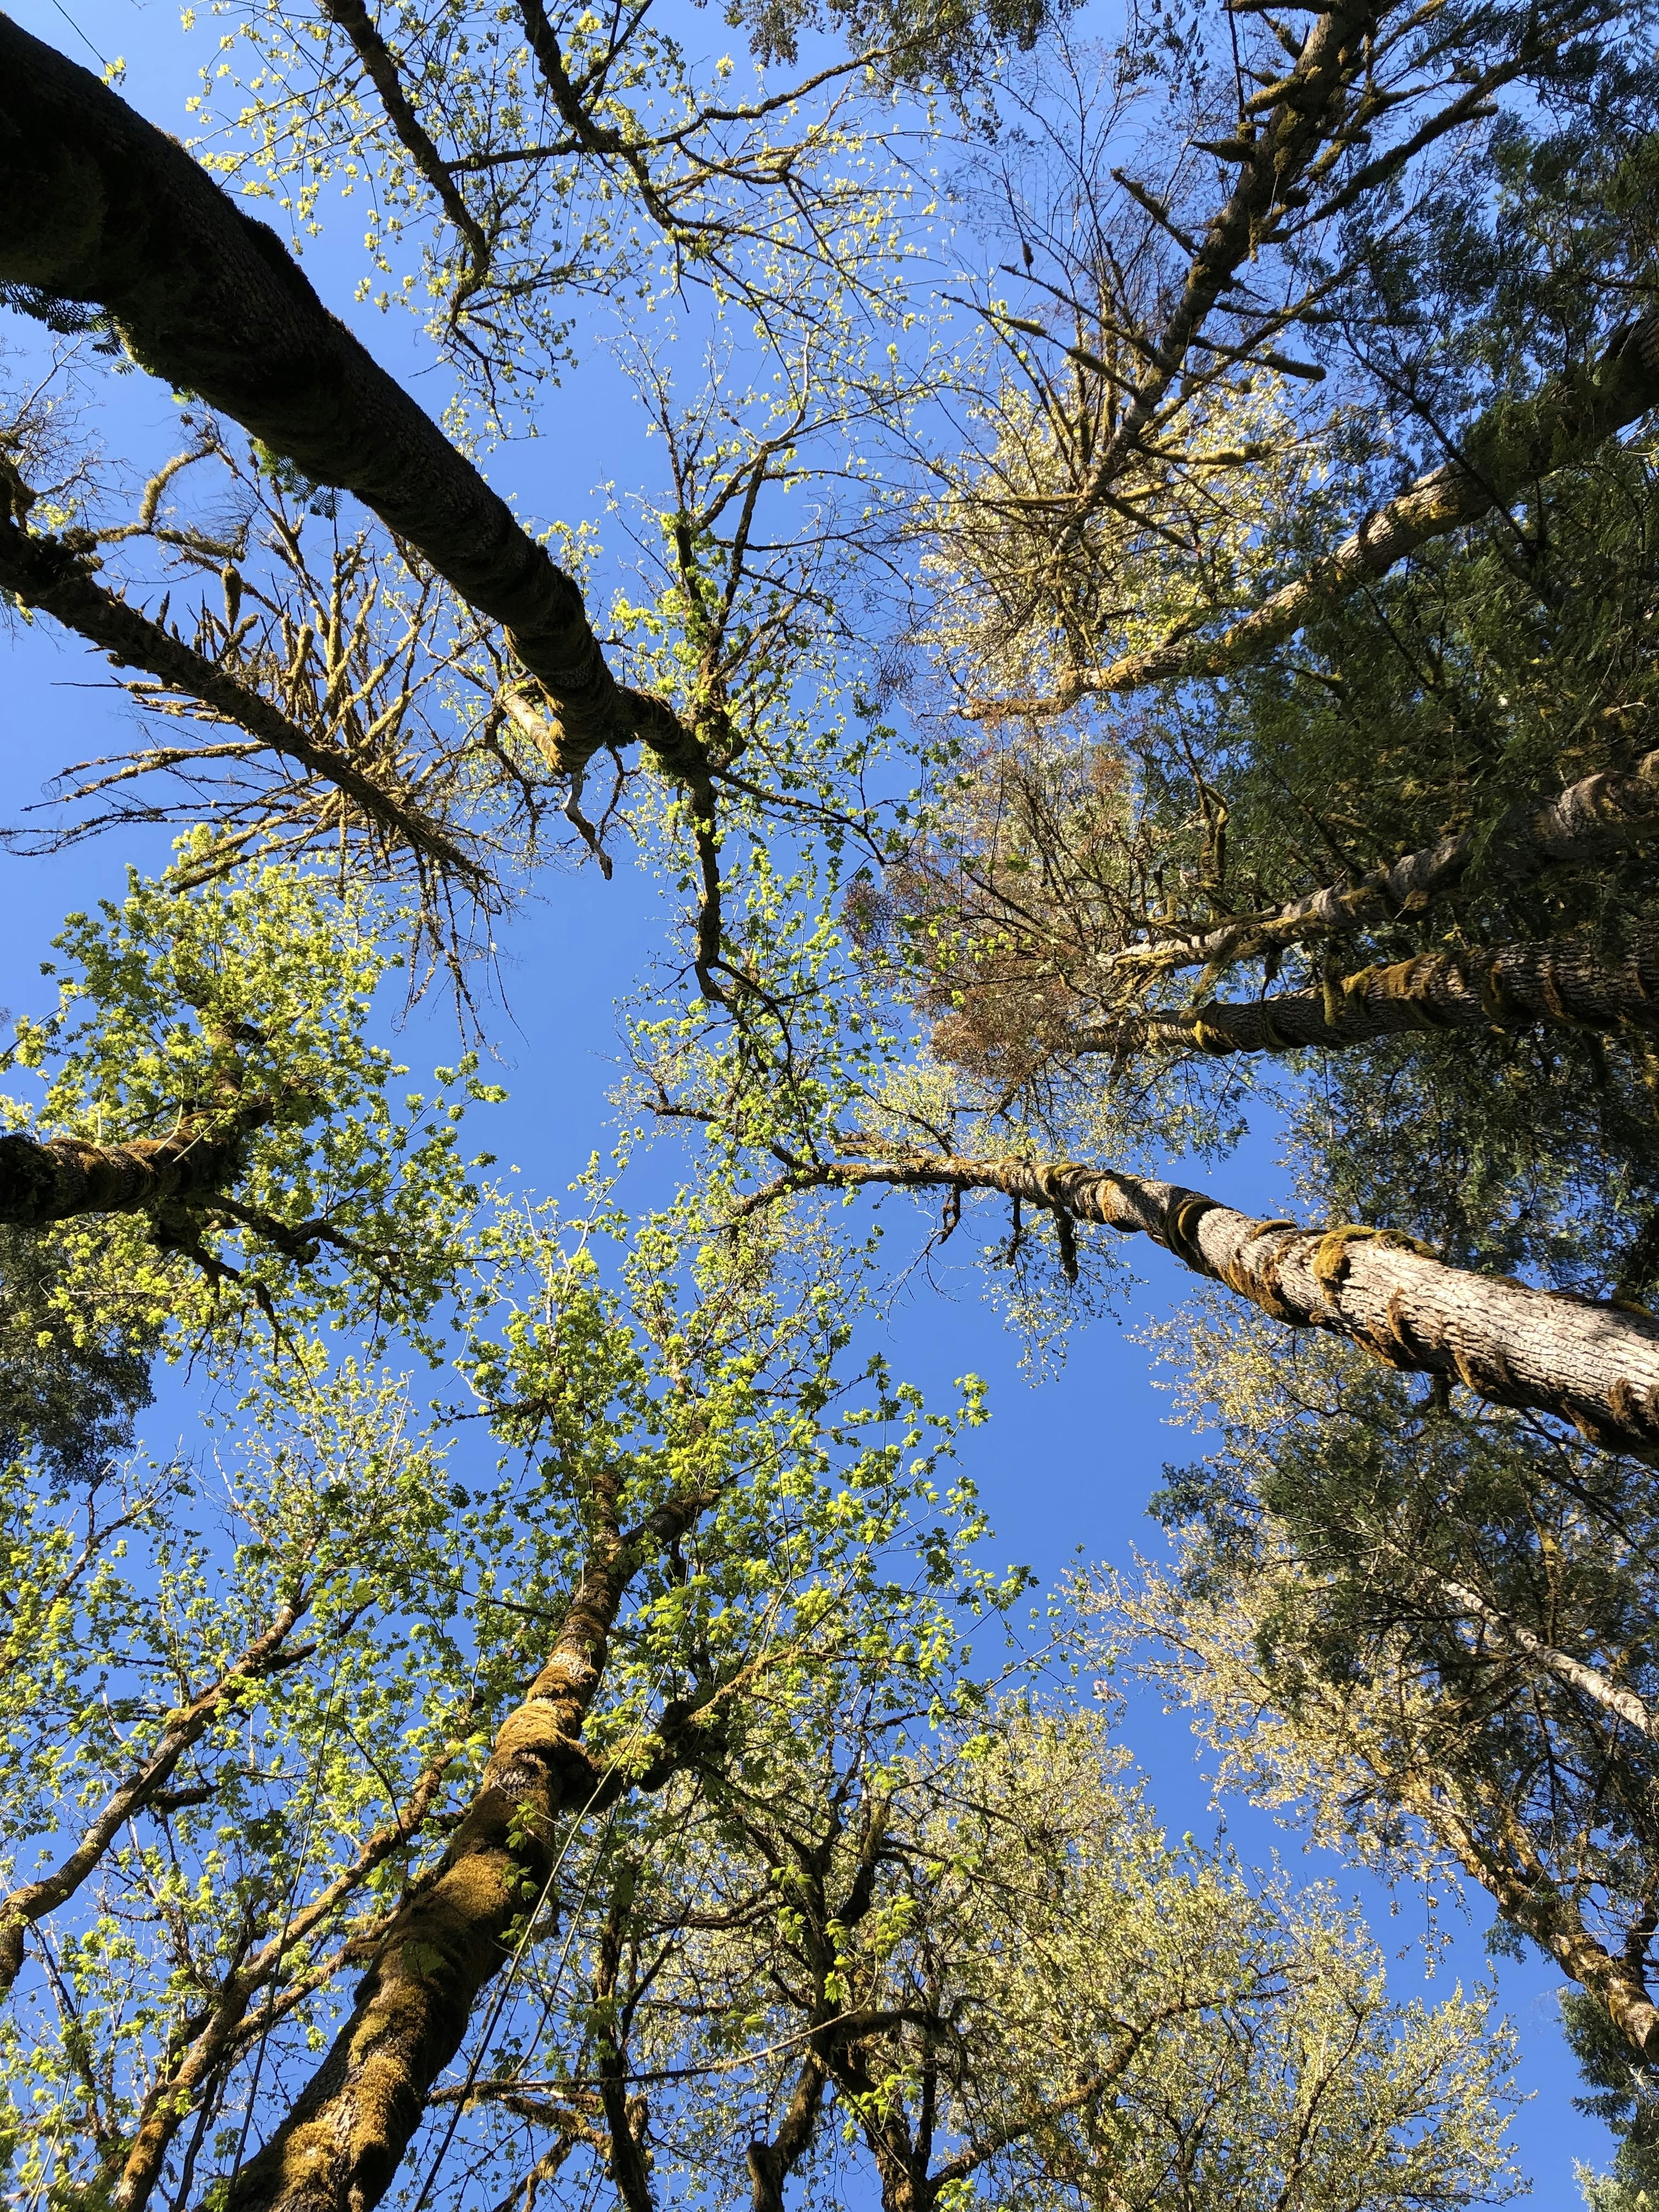 a photo of the tree canopy looking directly up at the treetops against blue sky